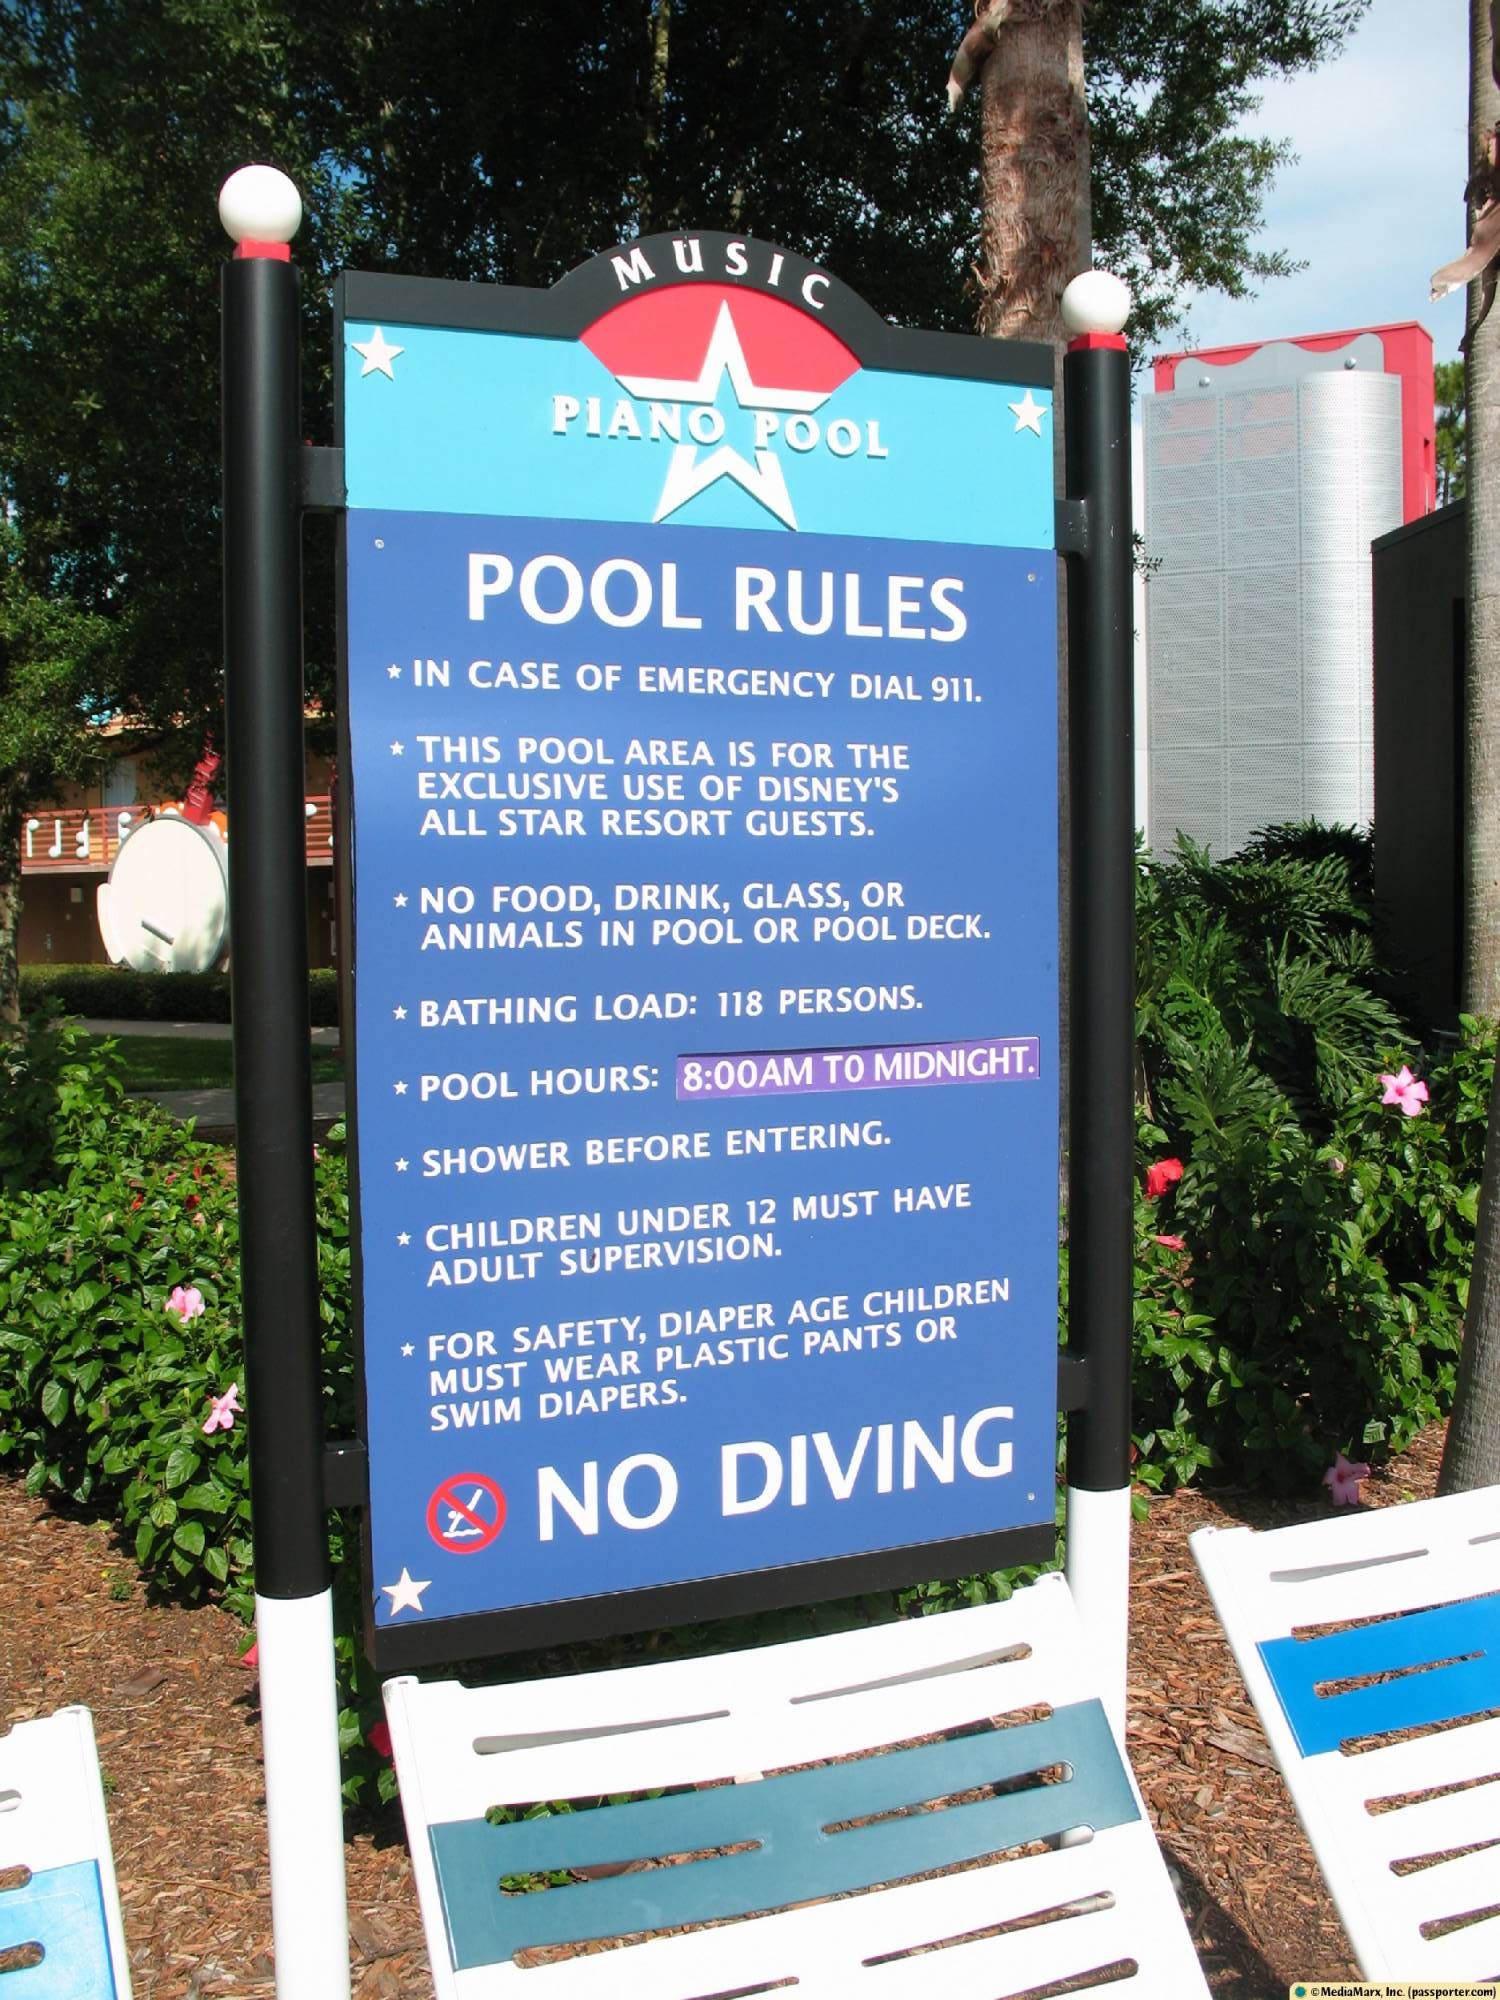 All-Star Music - Piano Pool Rules